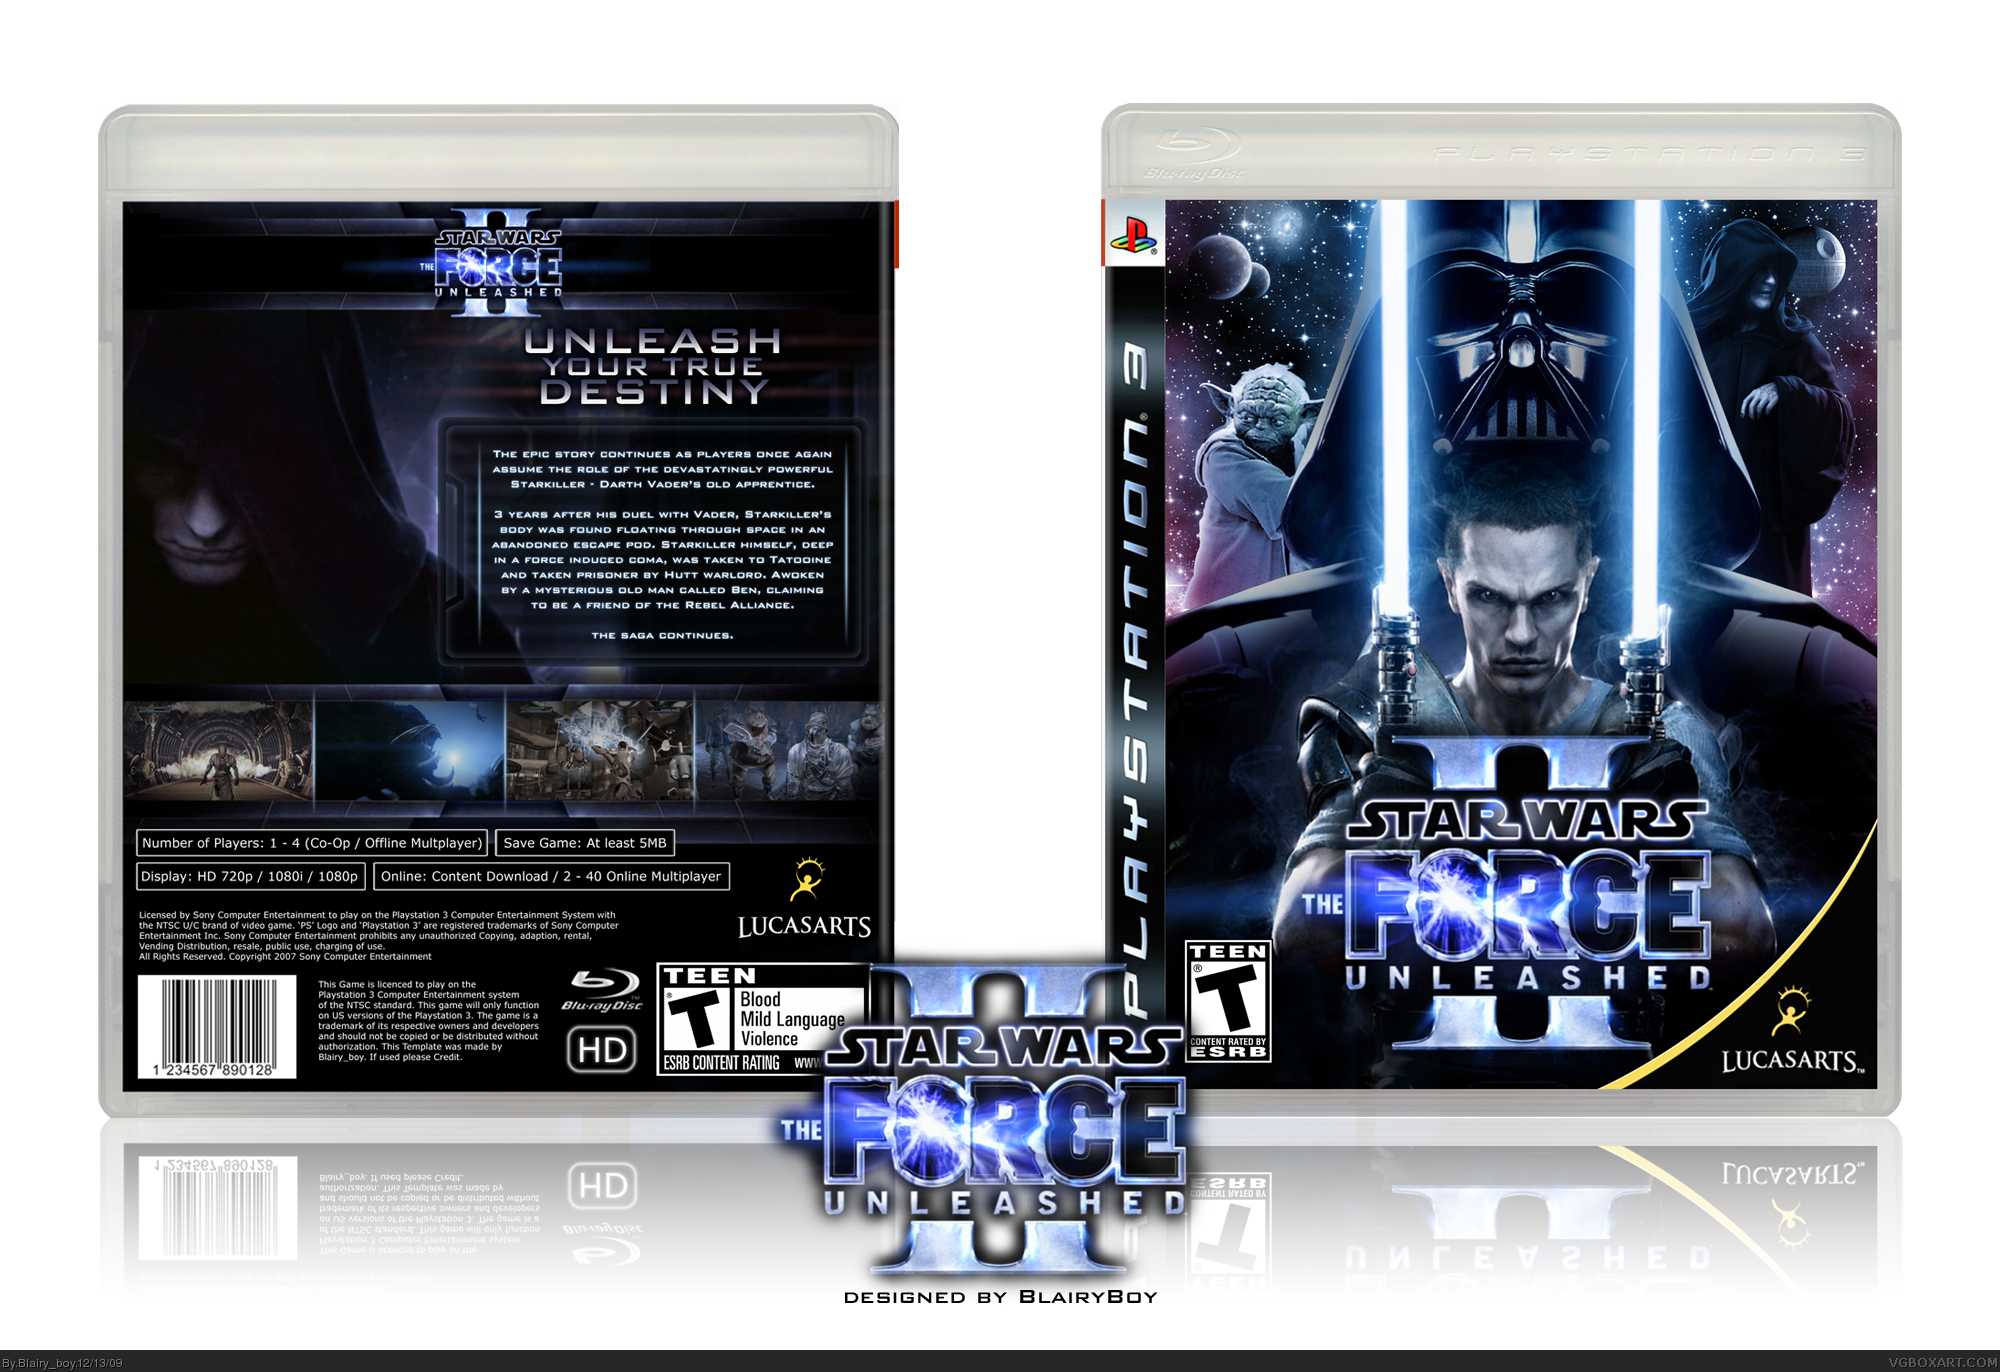 Star wars the force unleashed коды. Star Wars Force ps2. Star Wars: the Force unleashed II (ps3). Force unleashed 2 ps3. PLAYSTATION 2 the Force unleashed.